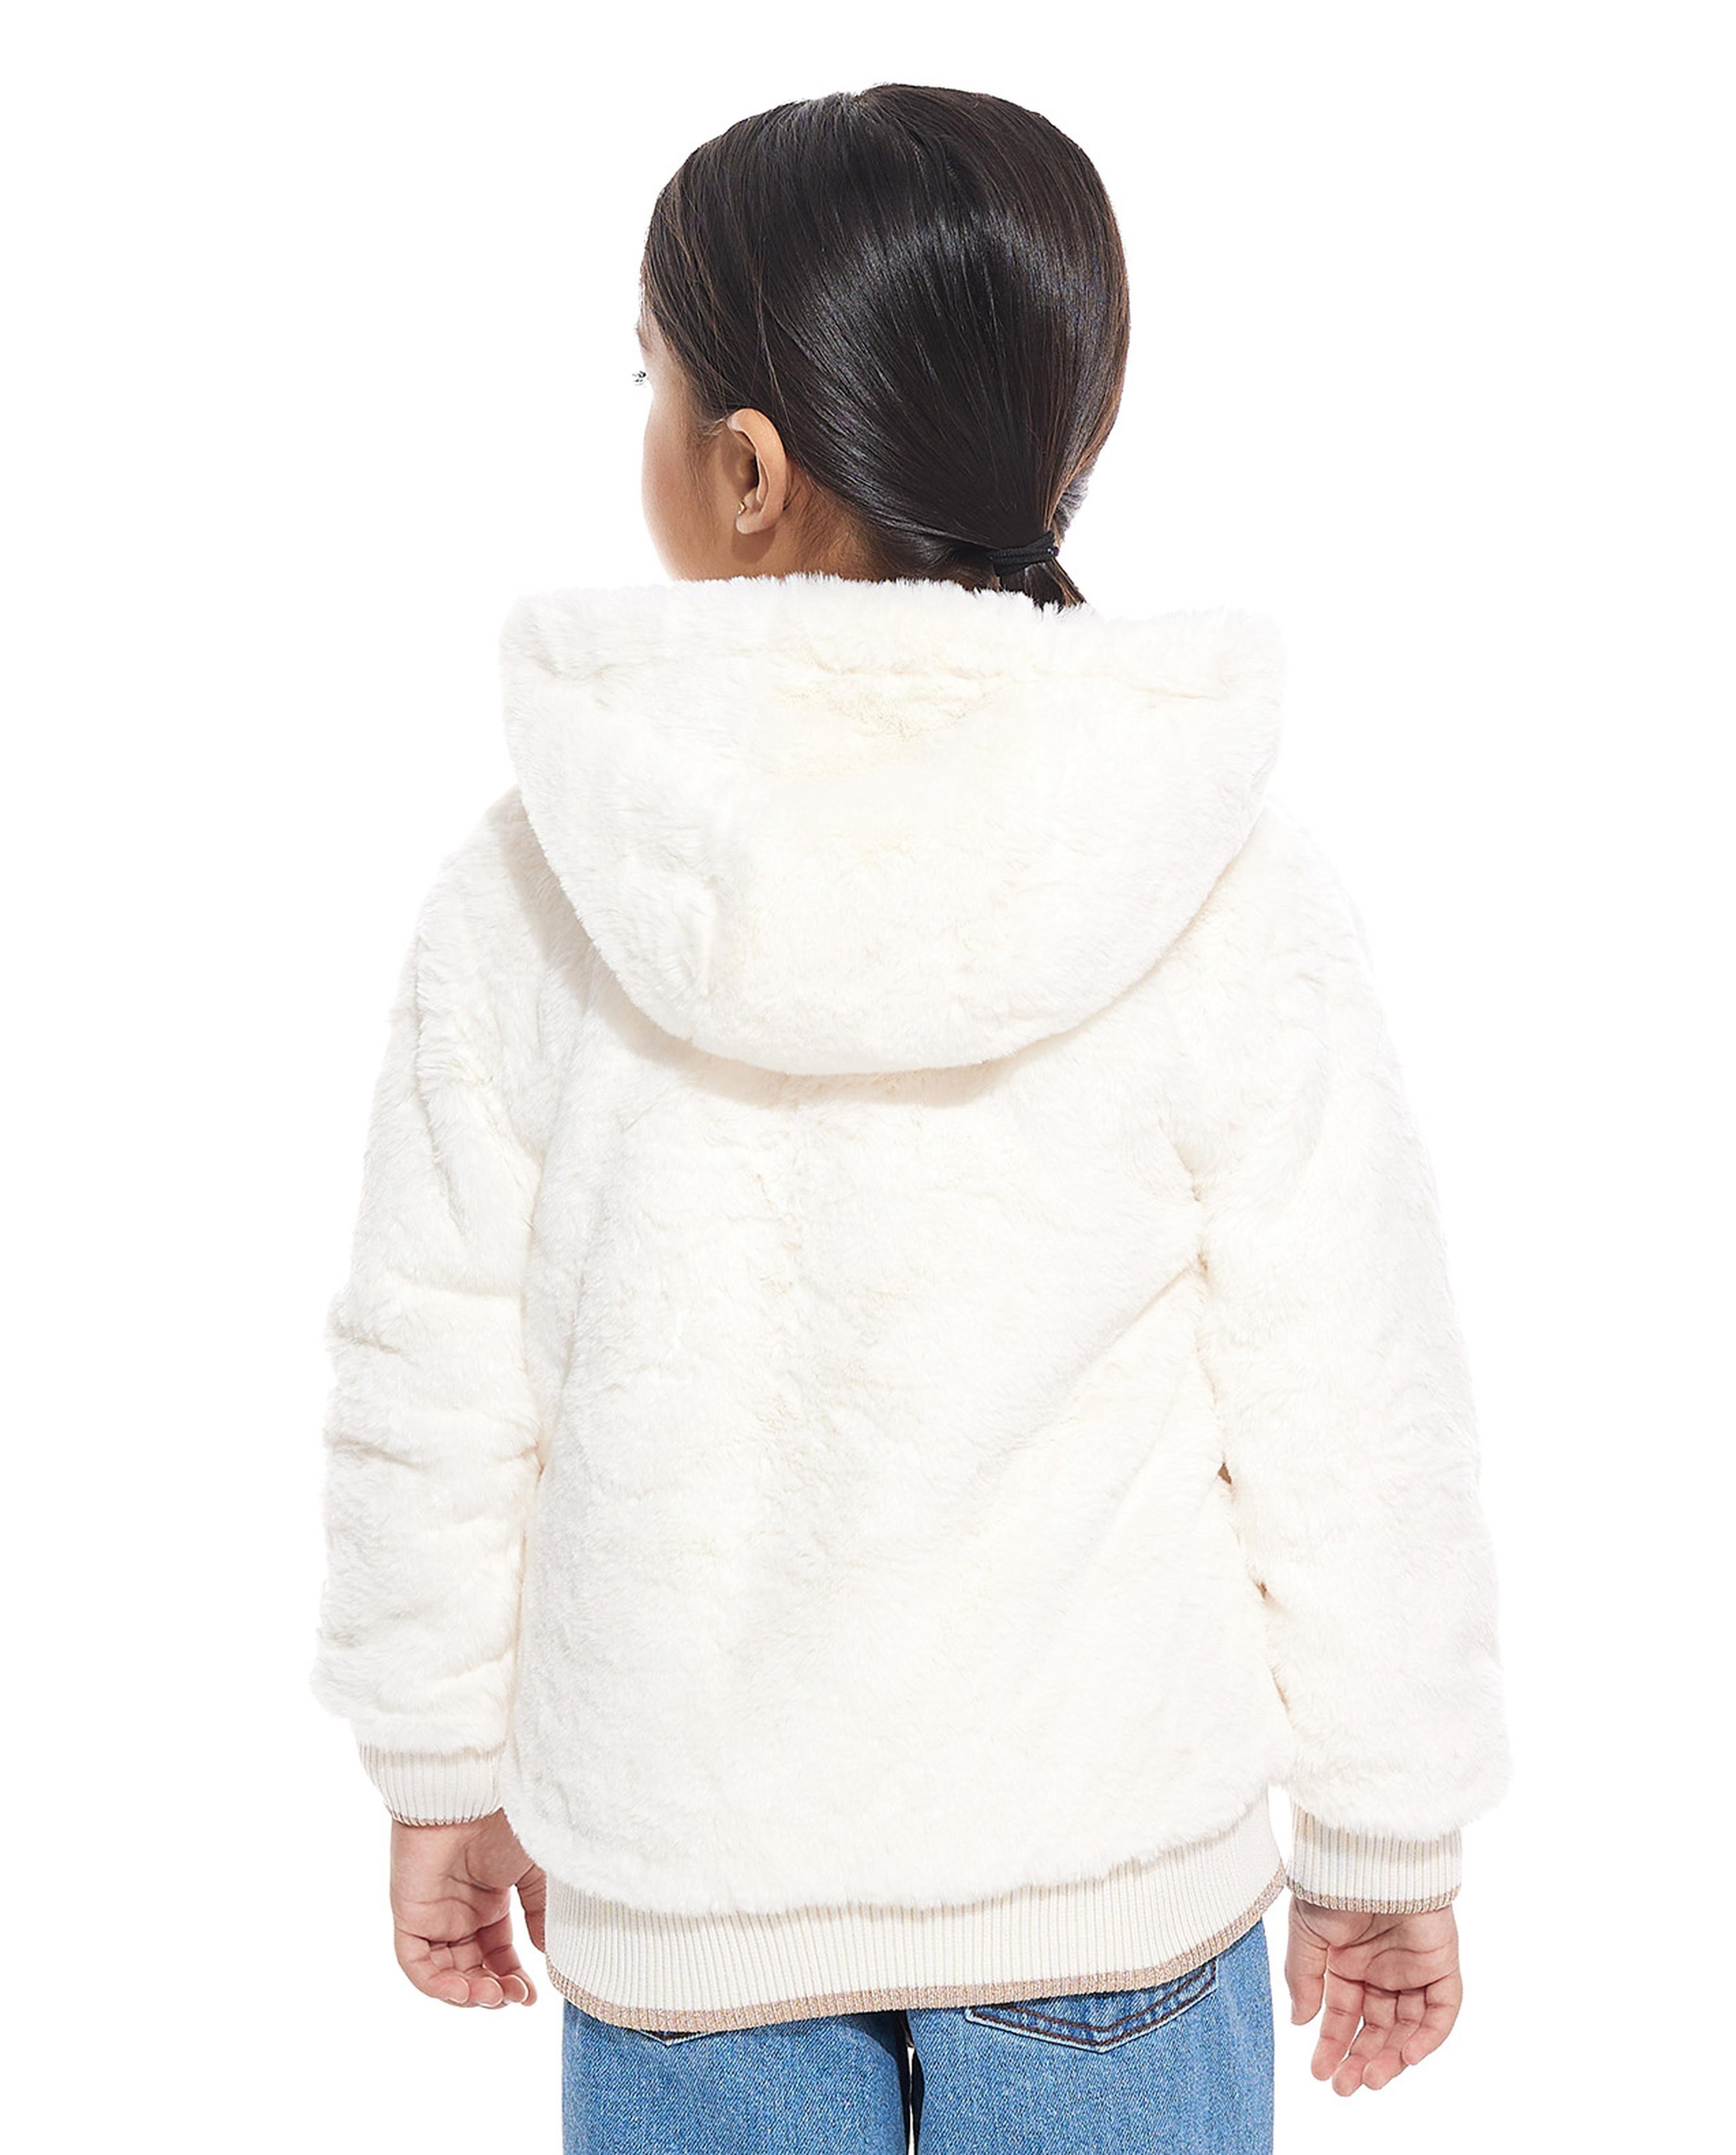 Furry Hooded Jacket with Zipper Closure